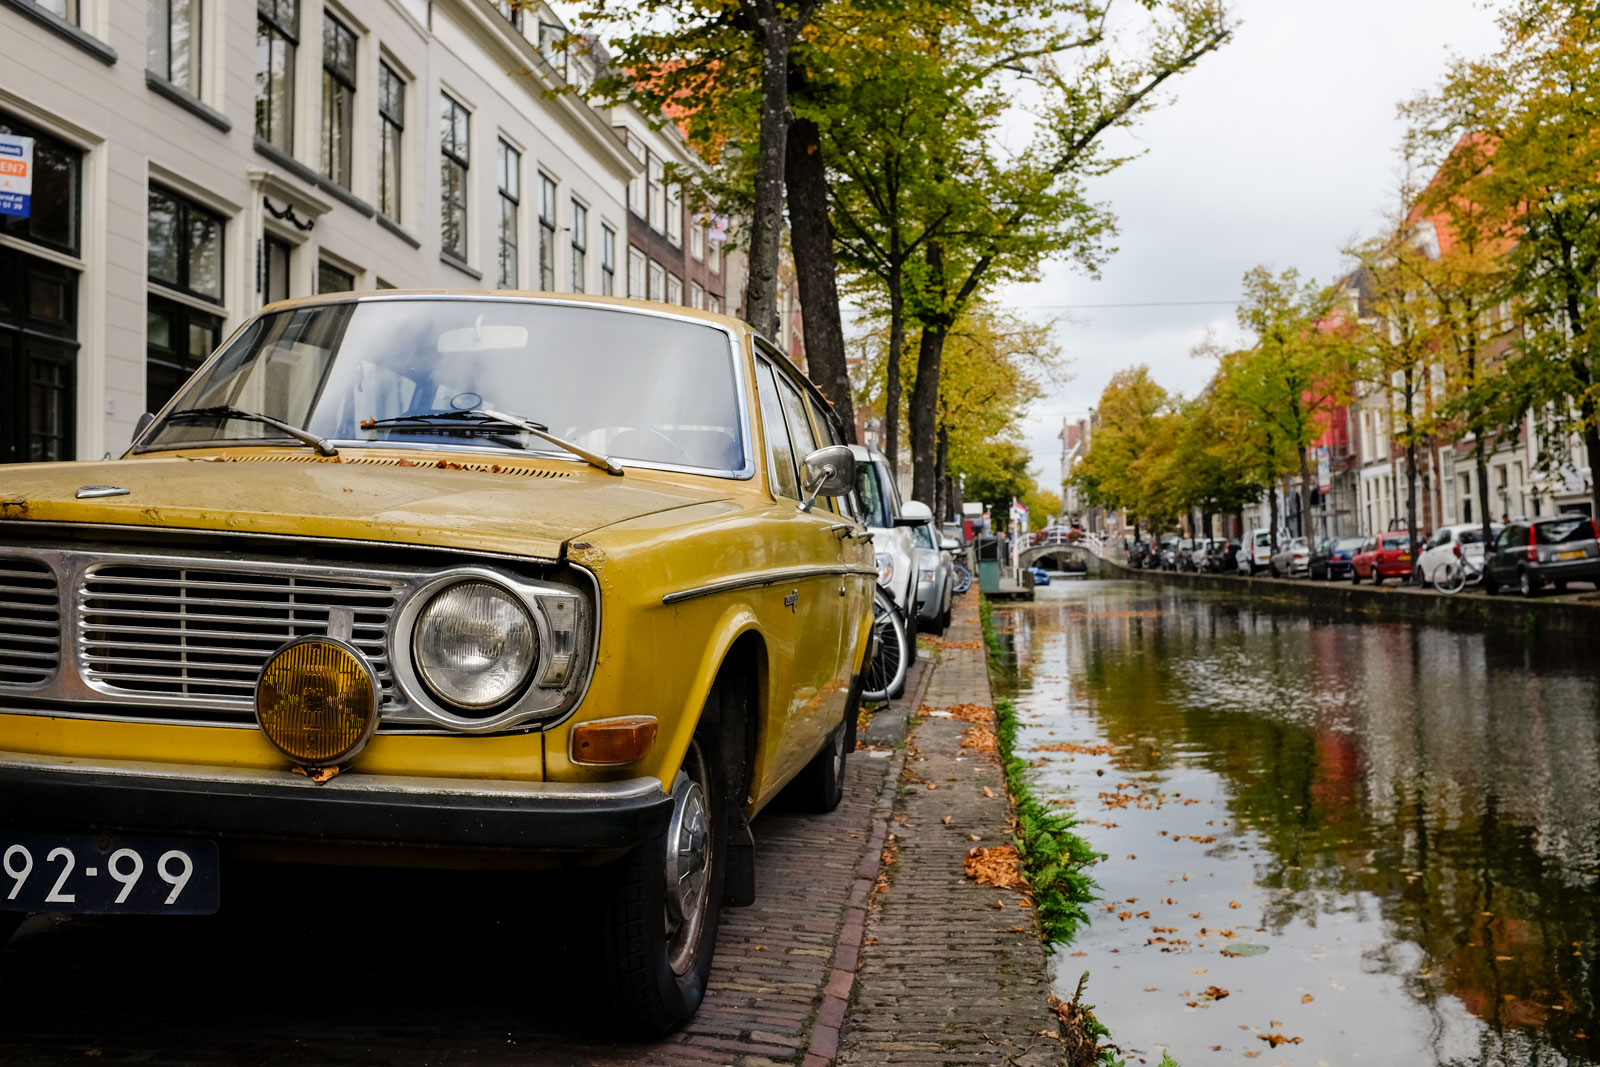 Cars parked along the canal in Delft